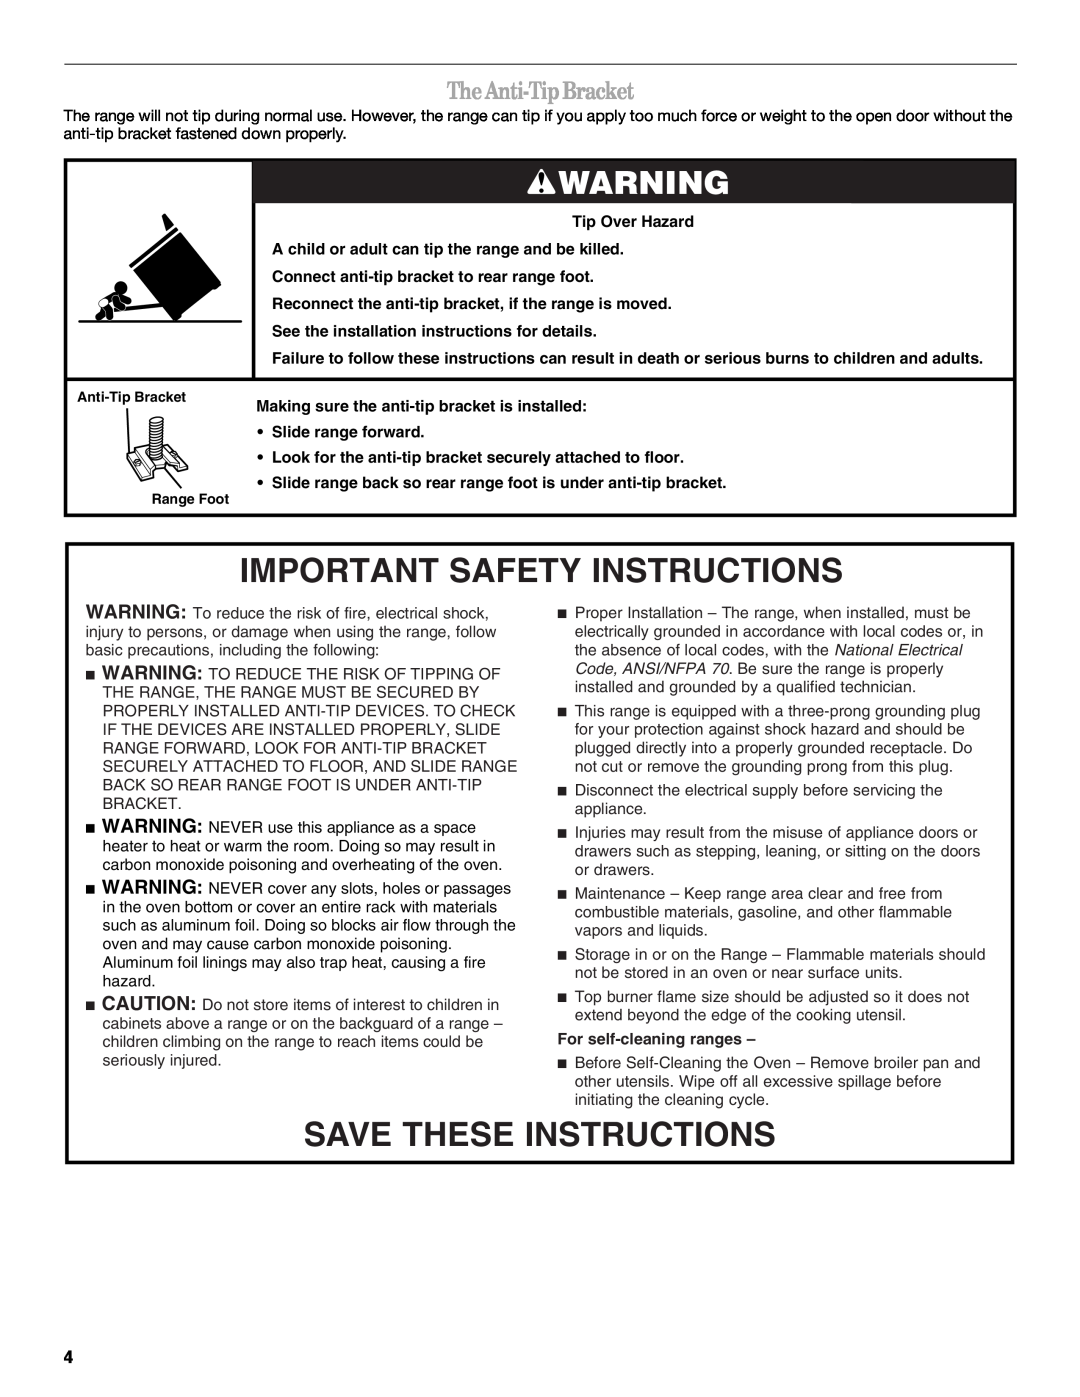 Whirlpool W10106890 Important Safety Instructions, Save These Instructions, TheAnti-TipBracket, For self-cleaning ranges 